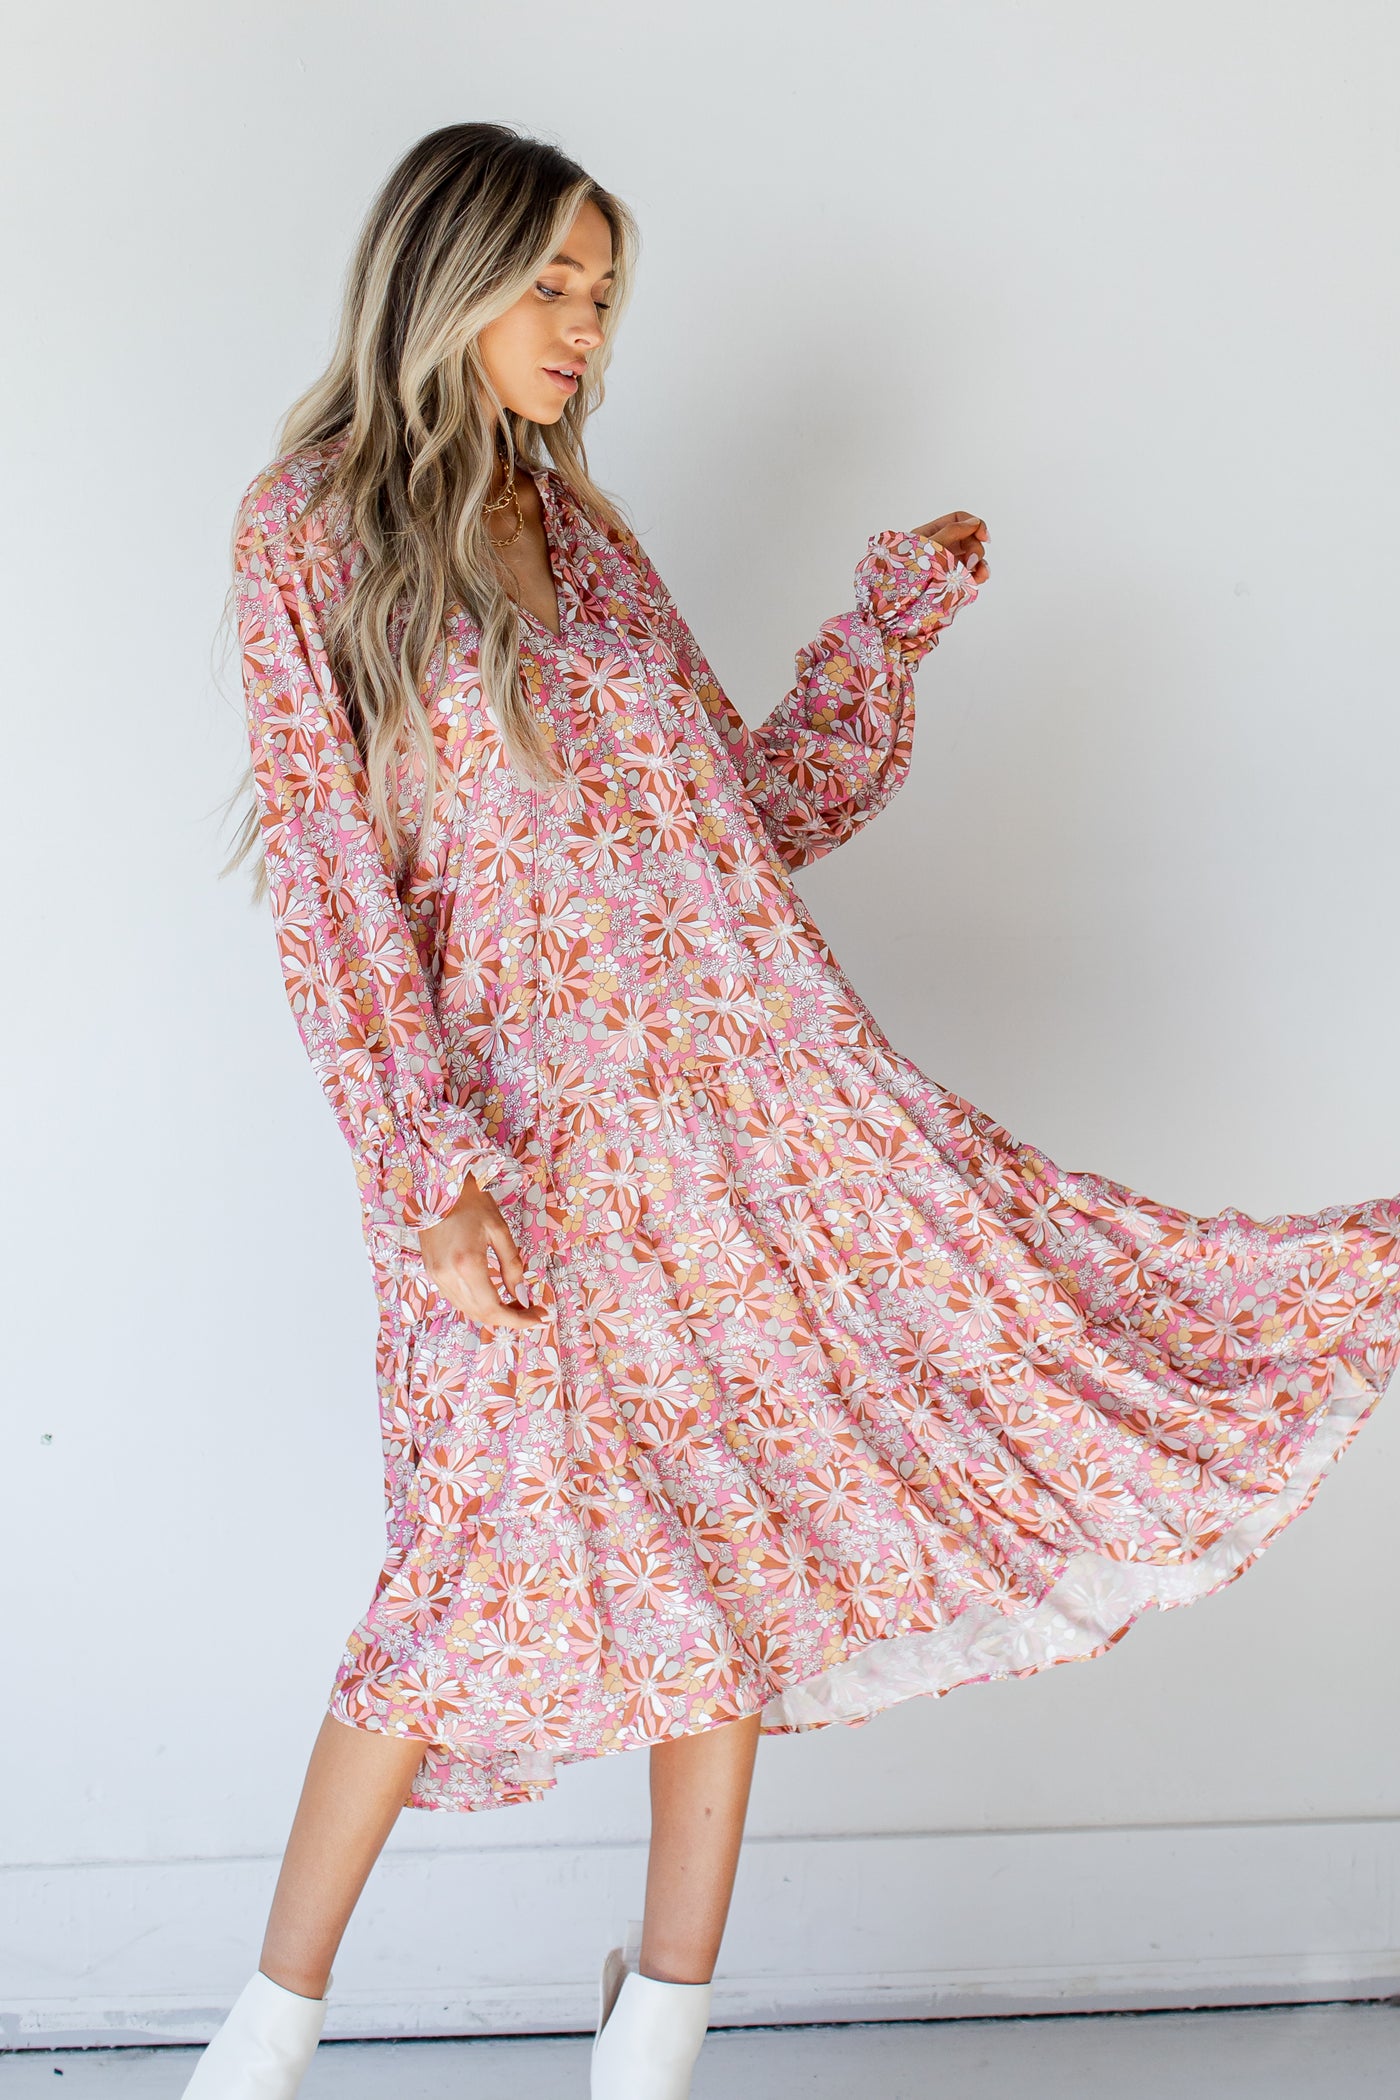 Floral Midi Dress from dress up